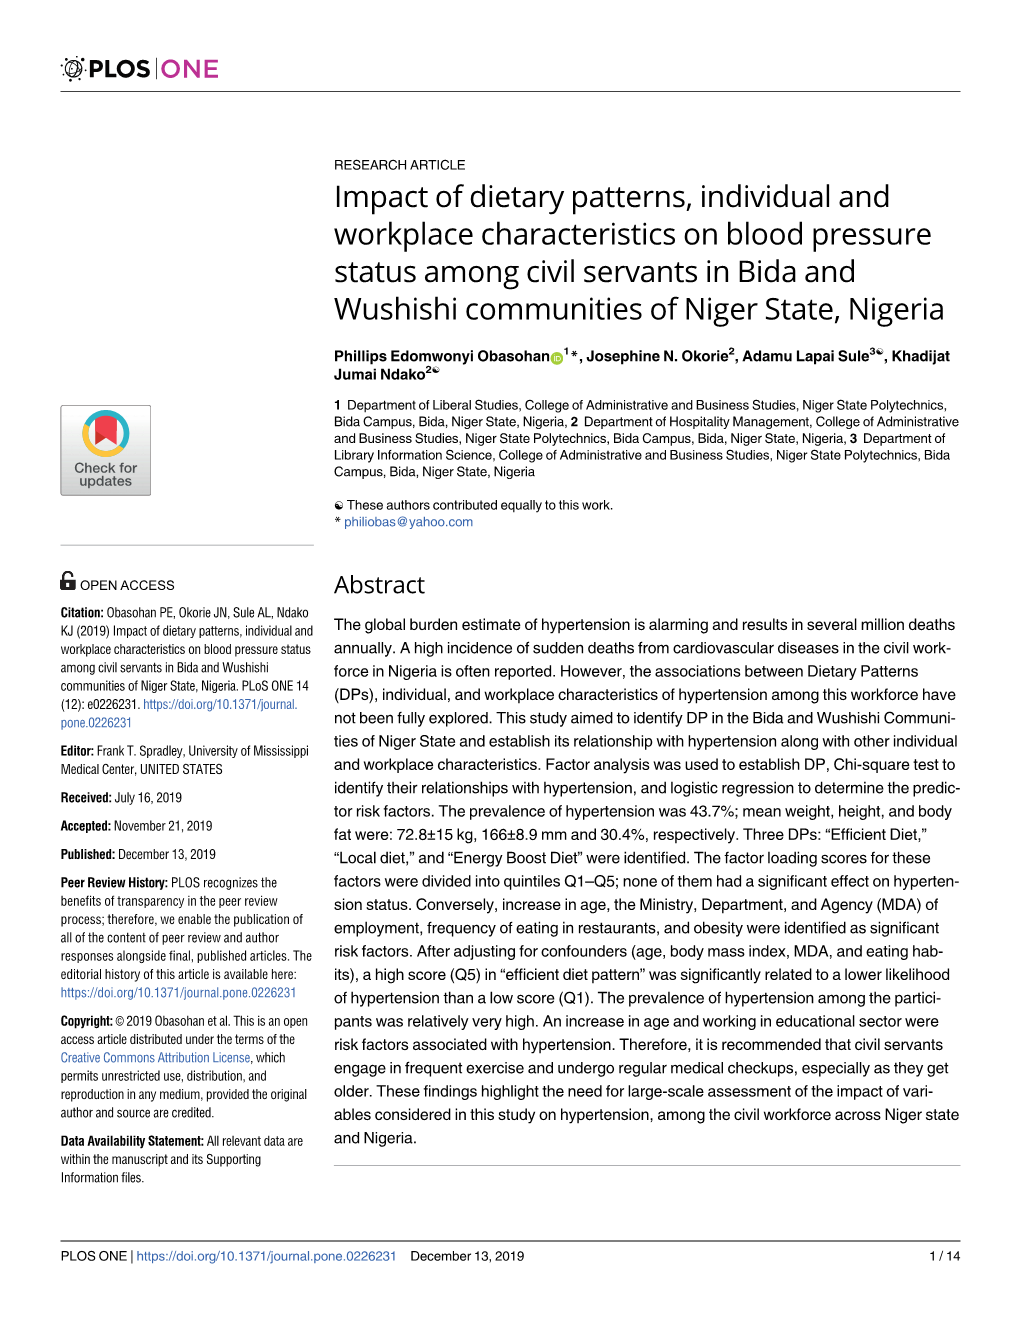 Impact of Dietary Patterns, Individual and Workplace Characteristics on Blood Pressure Status Among Civil Servants in Bida and W